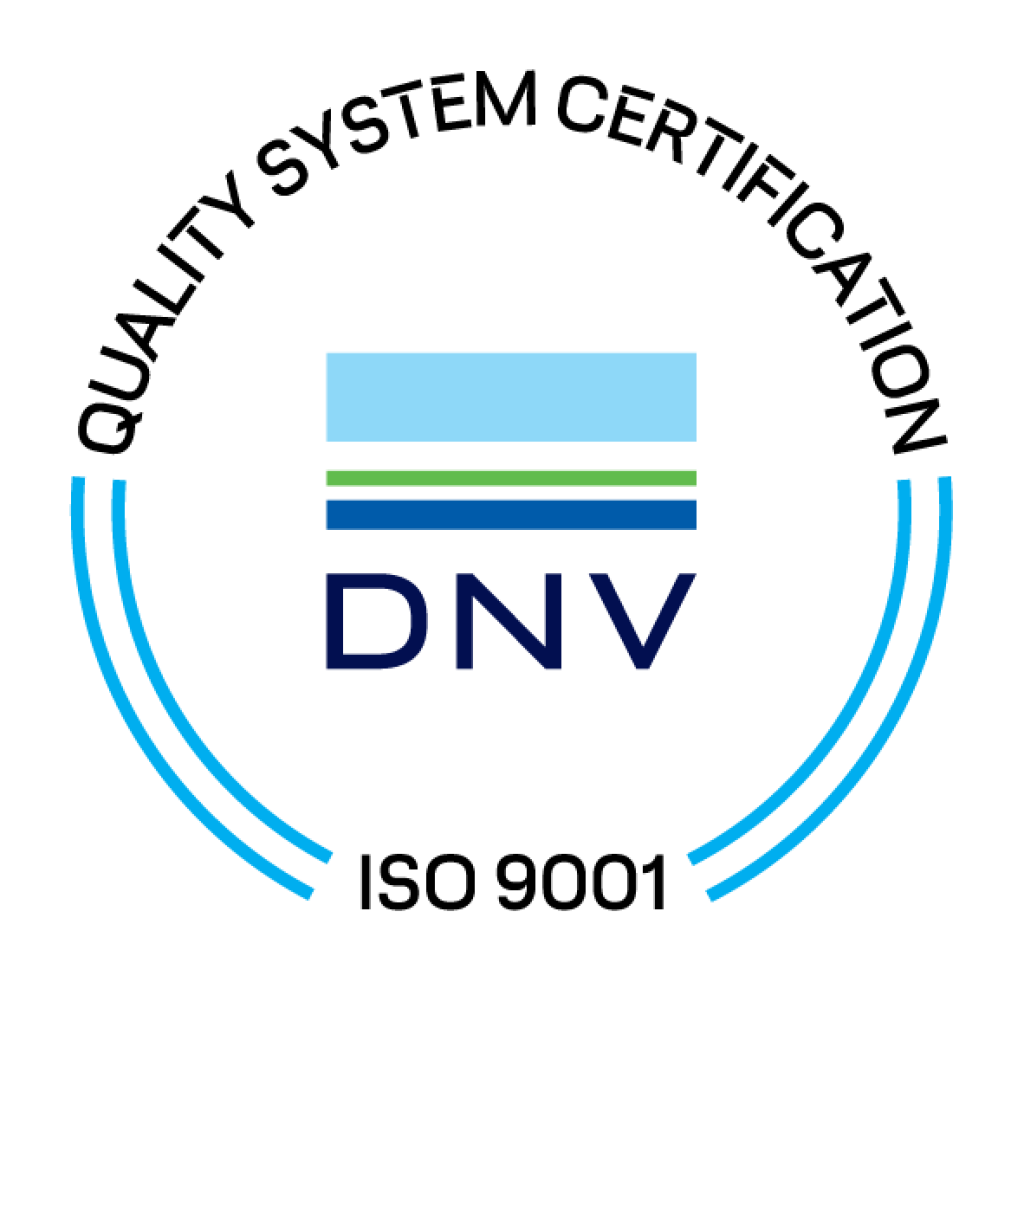 DNV Quality System Certification ISO 9001.